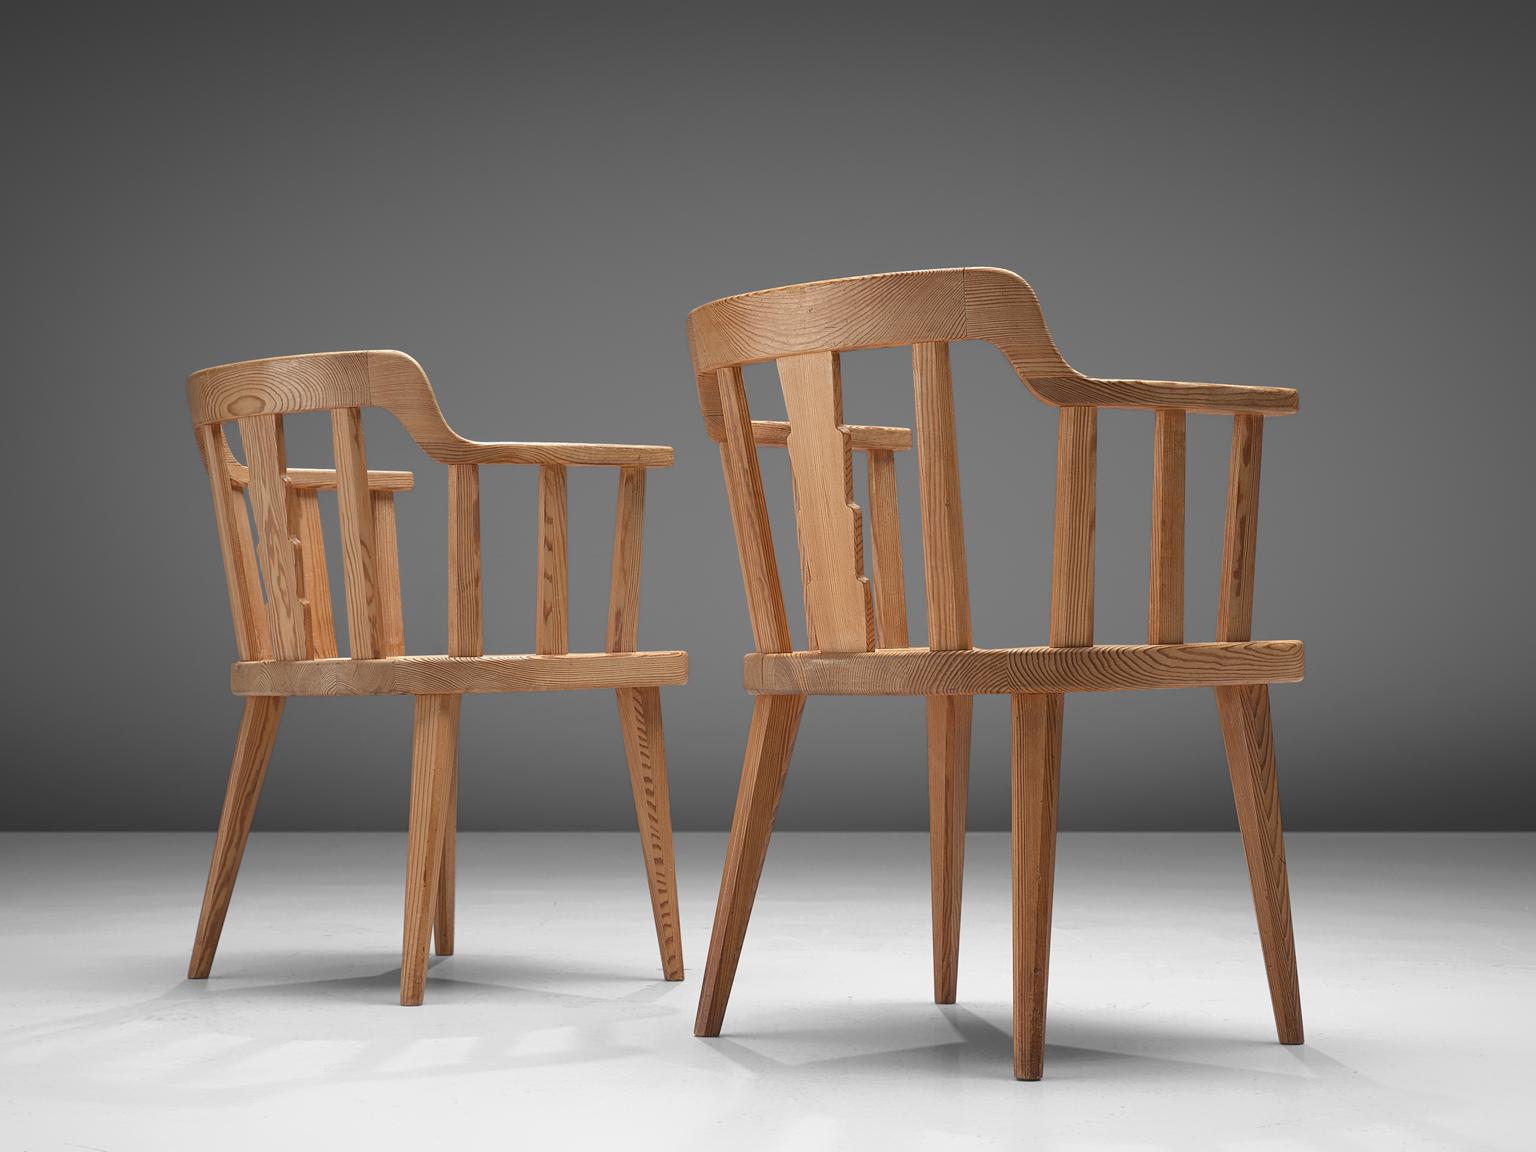 Nordiska Kompaniet, set of 2 armchairs 'Ekerö, pine, Sweden 1930s. 

Elegant set of two dining chairs. Executed in northern European pinewood. The design is simplistic; four tapered legs, solid seating and spindle or slat back. These chairs have a